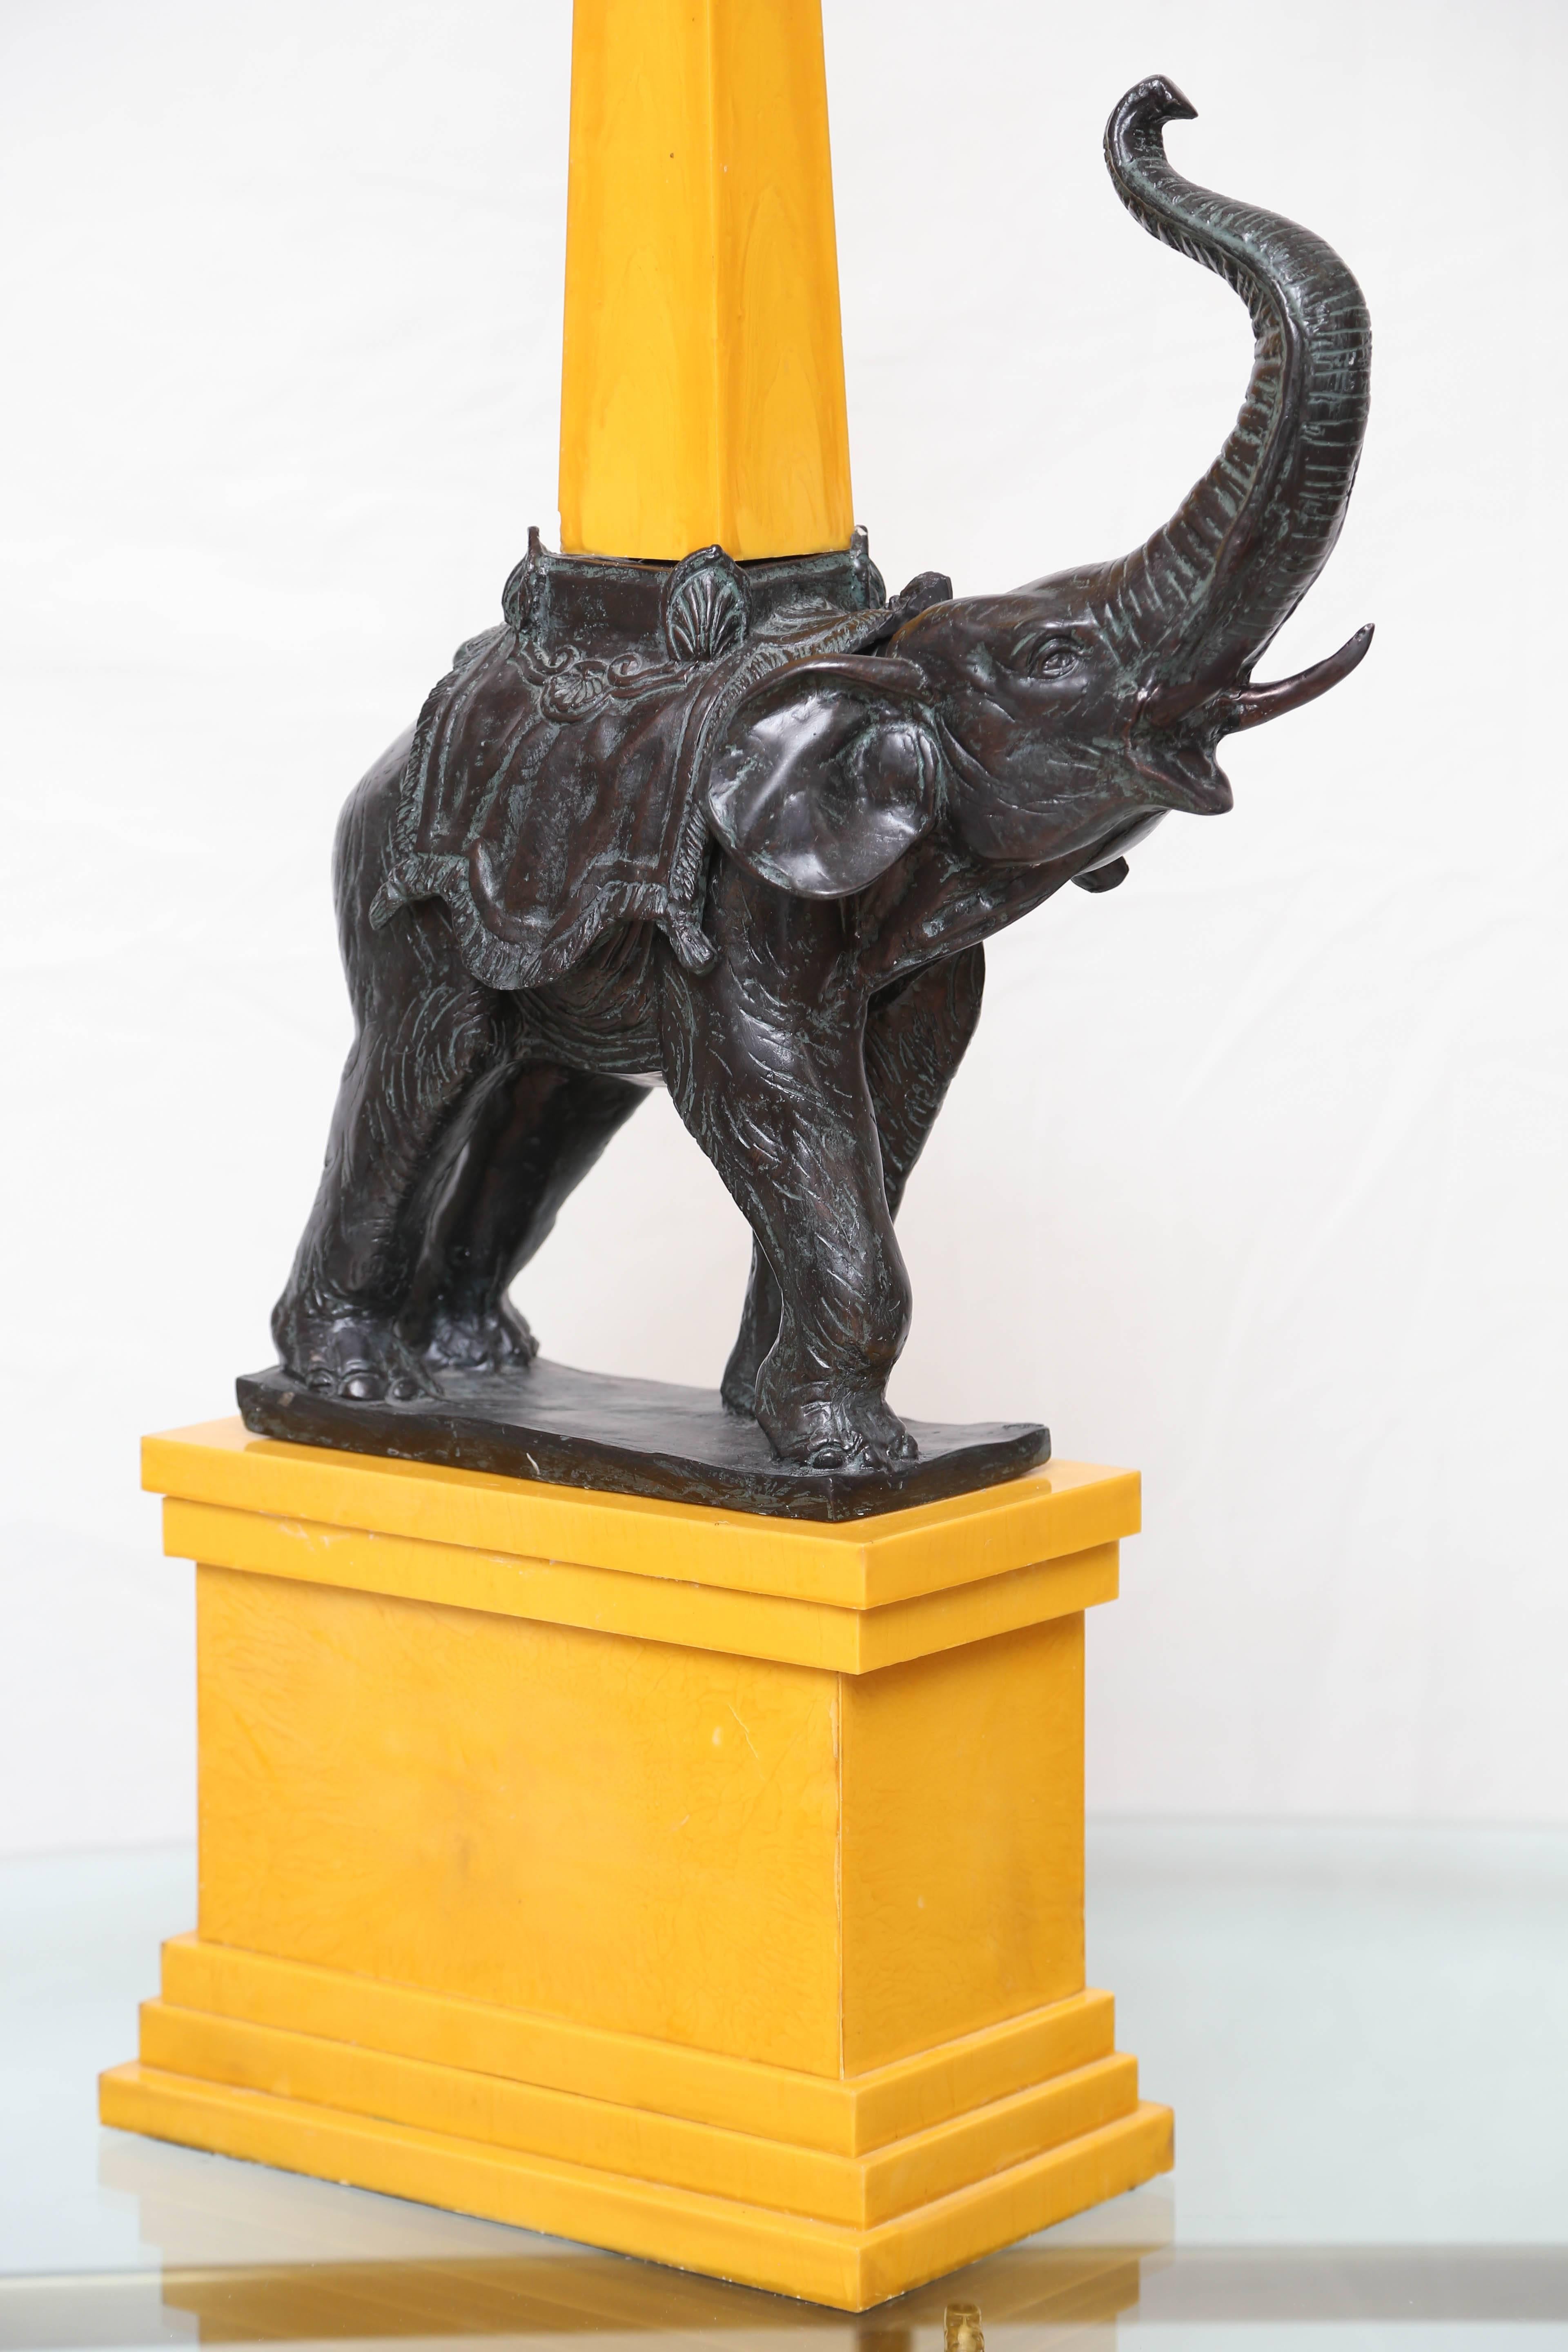 Imposing elephant standing on yellow faux marble base with obelisk on top.